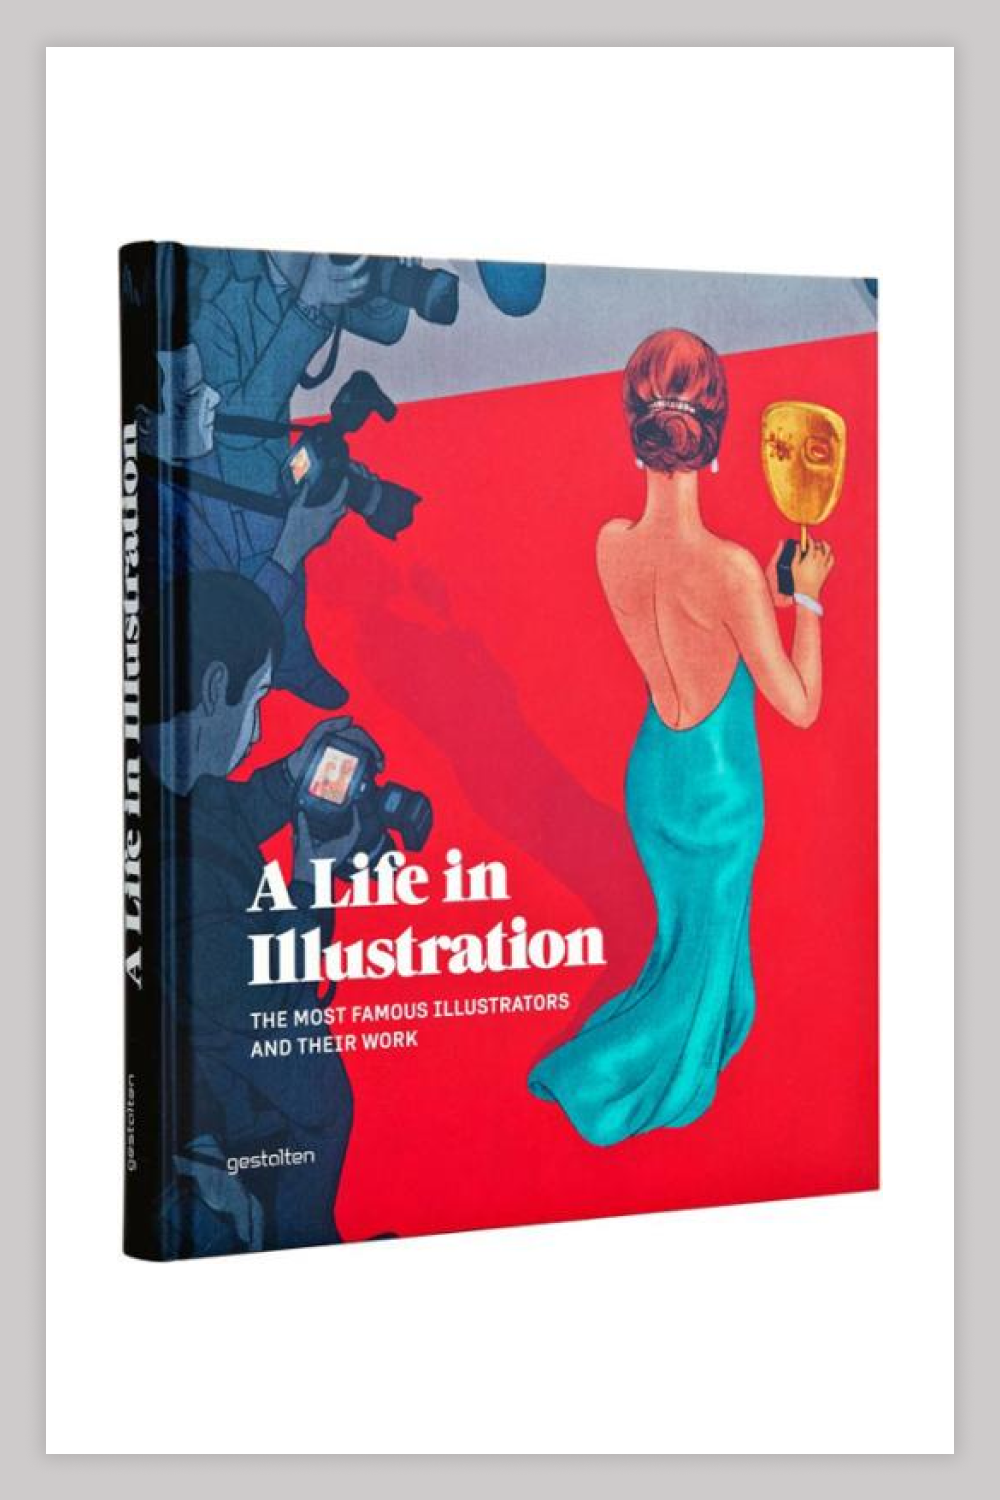 The book A Life in Illustration.